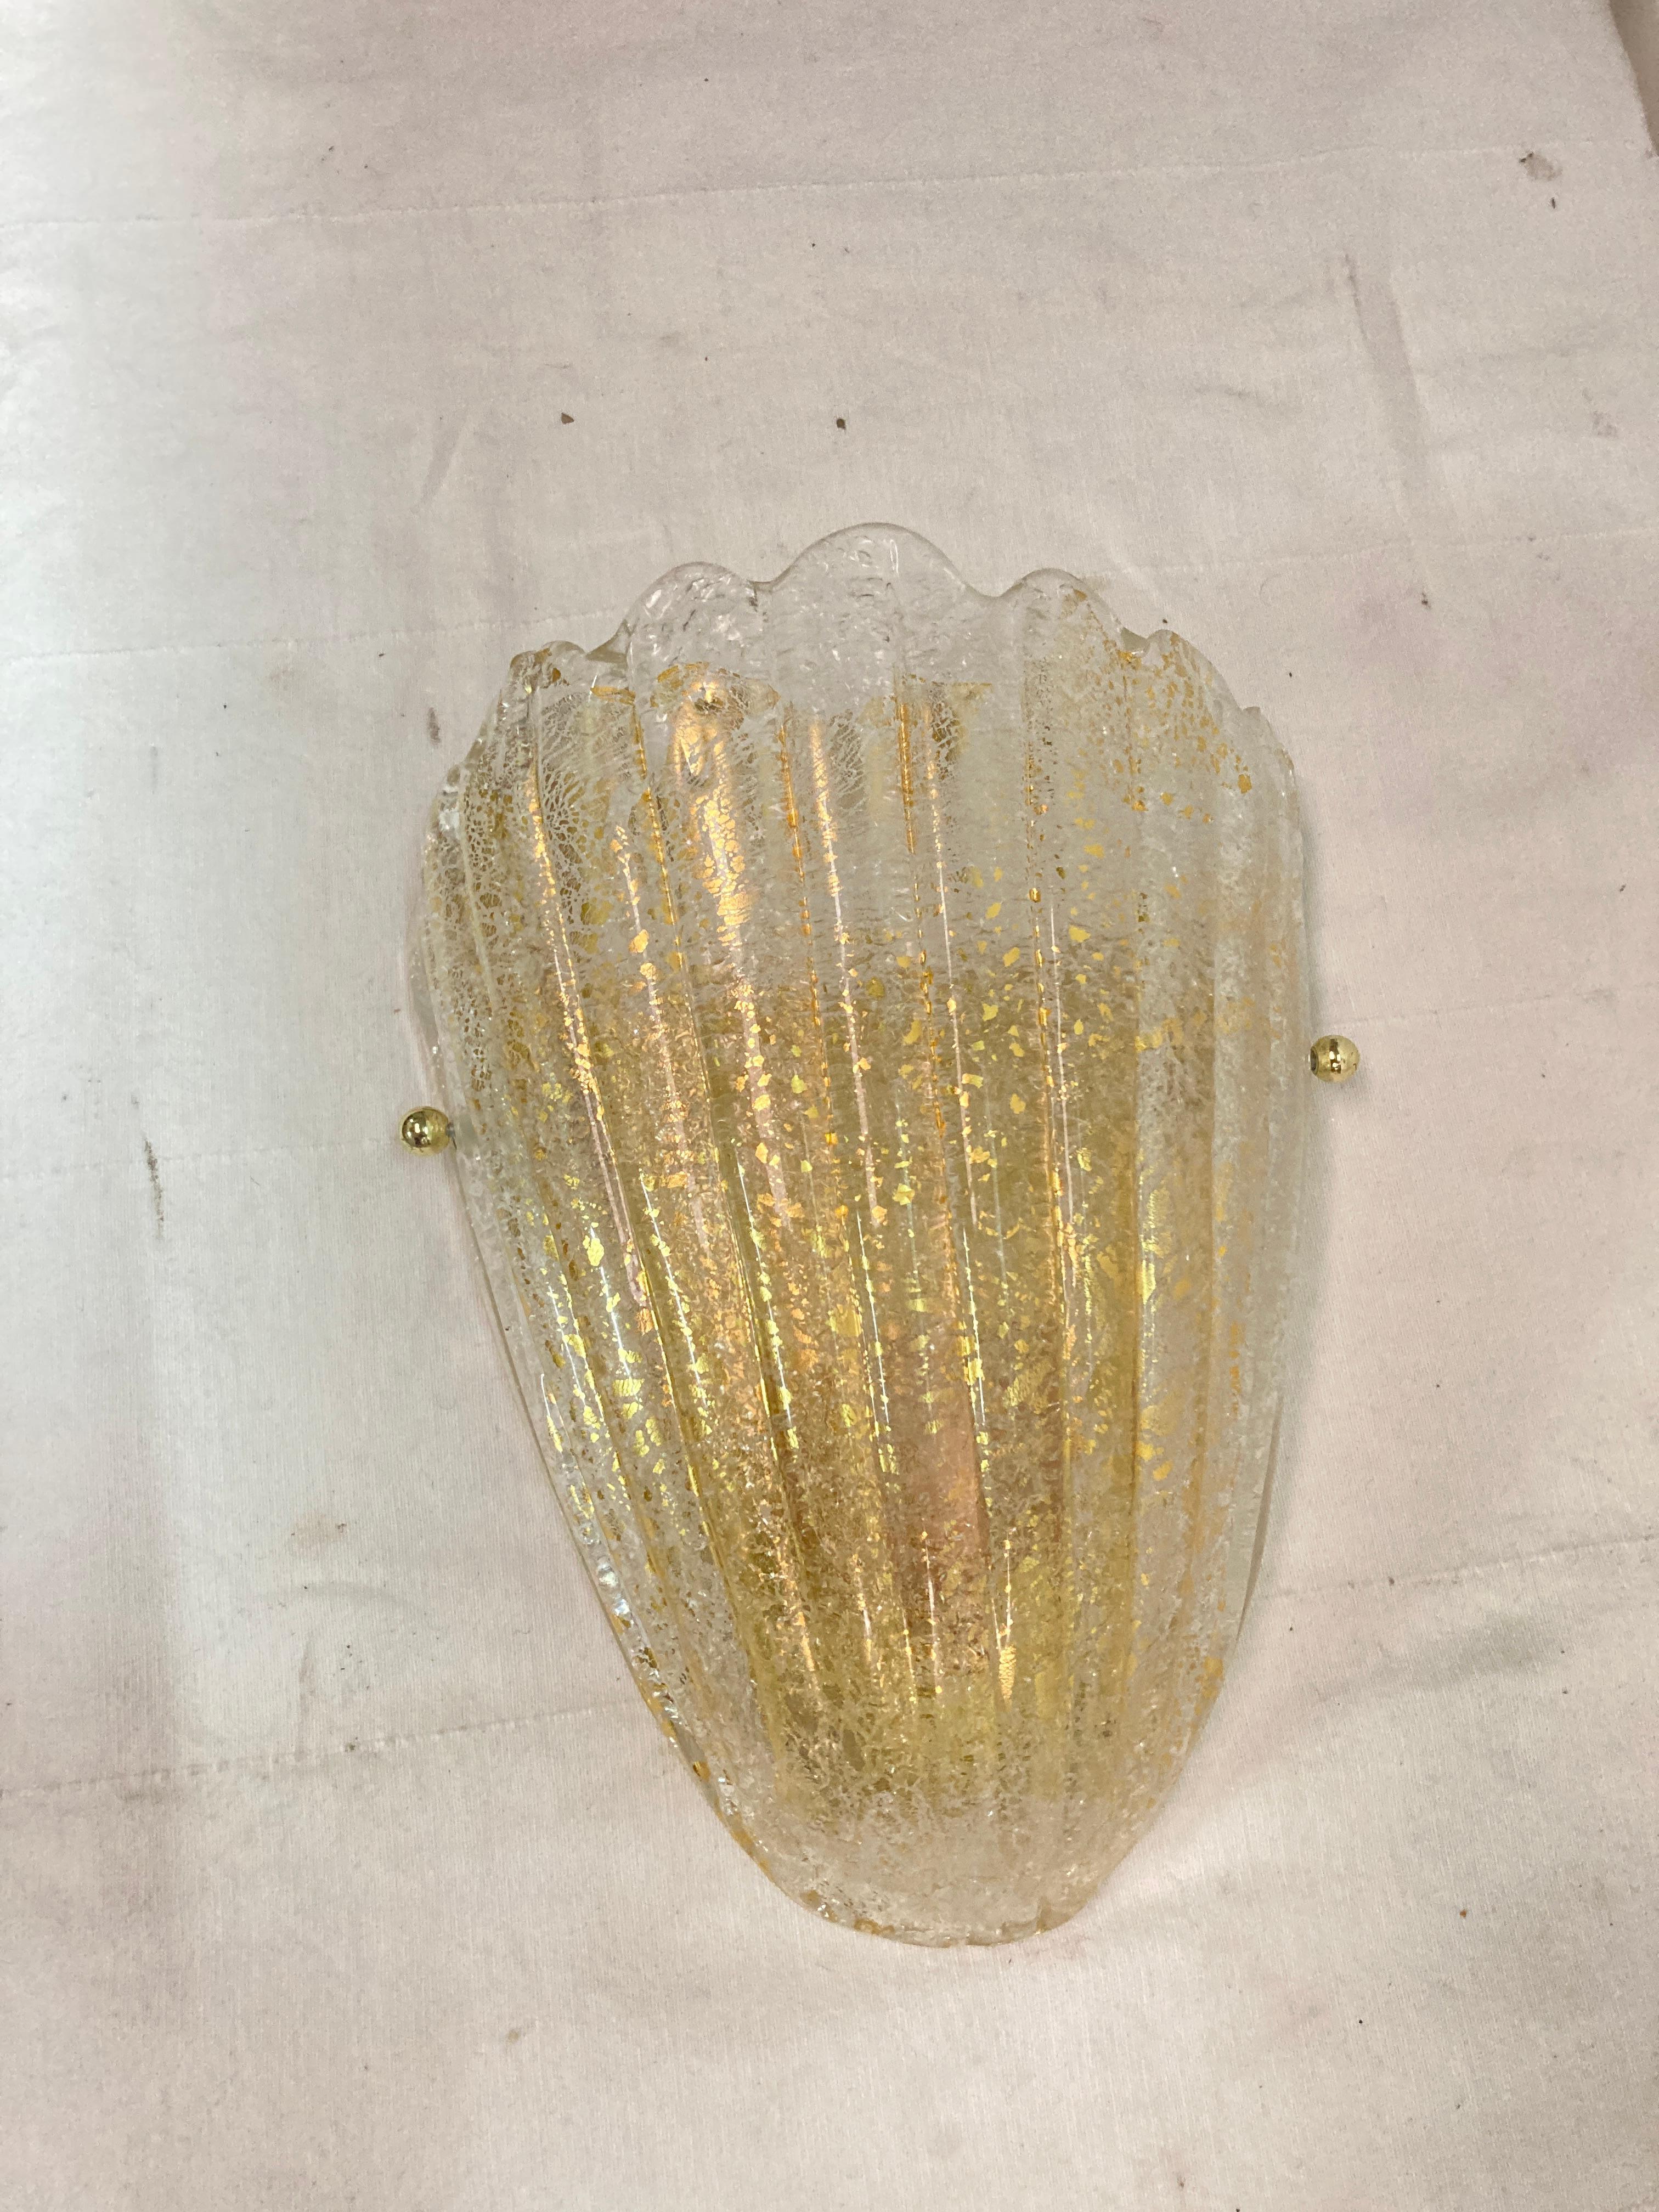 Nice pair of Murano glass sconces
Possibility of a second pair